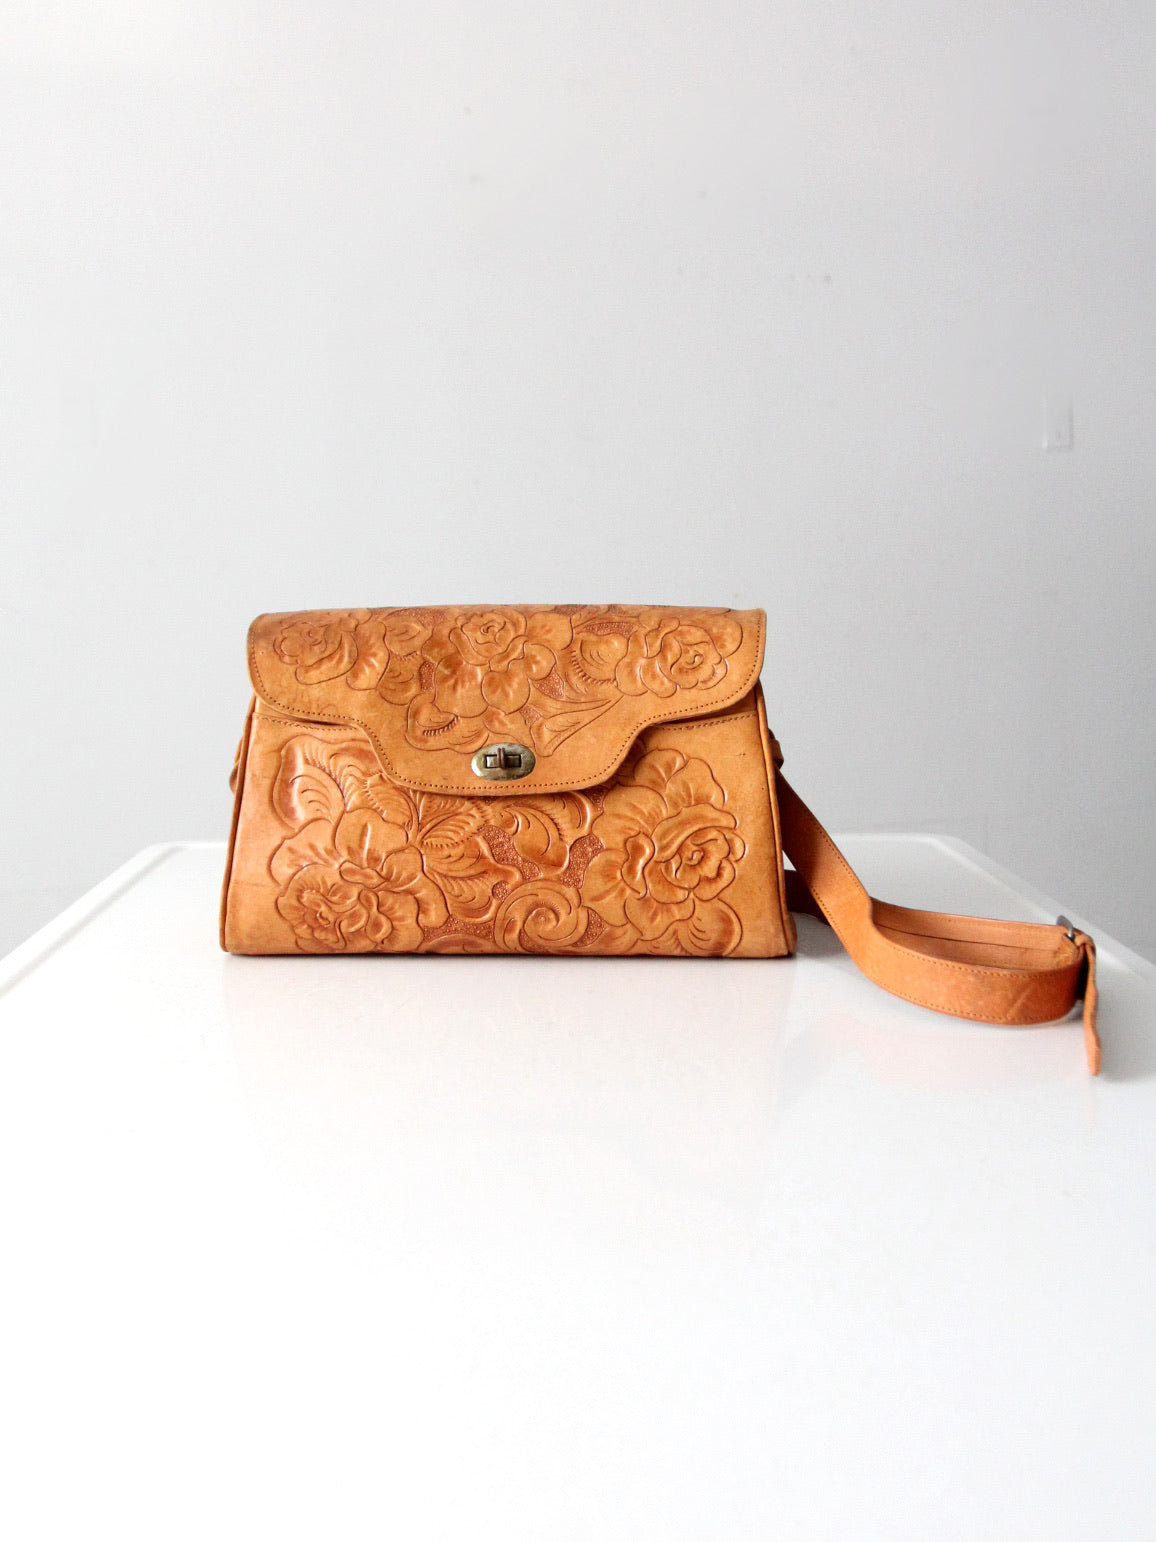 Rustic Southwest Hand Tooled Leather Coin Purse